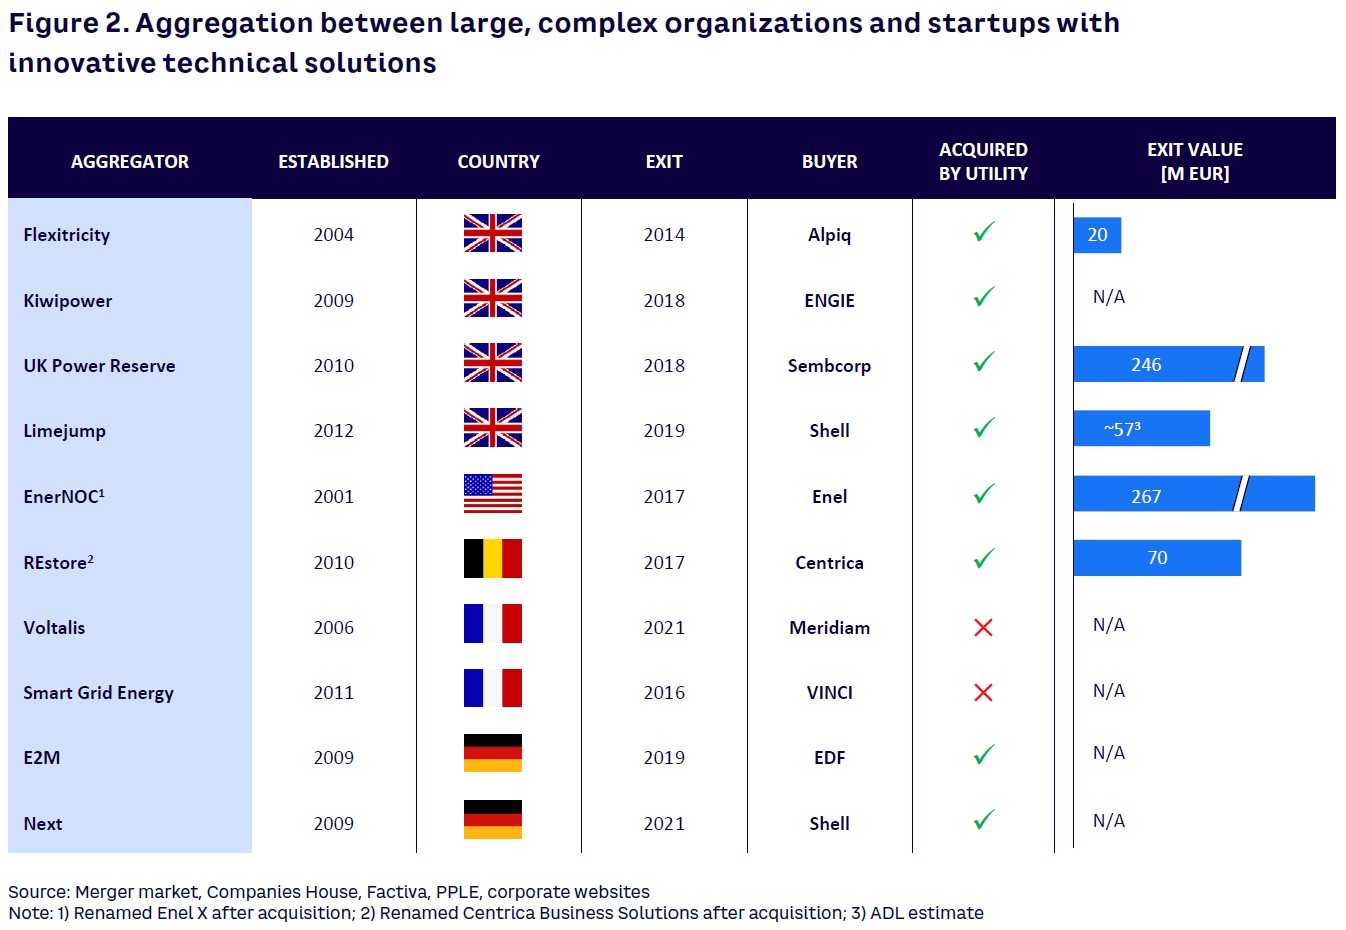 Figure 2. Aggregation between large, complex organizations and startups with innovative technical solutions